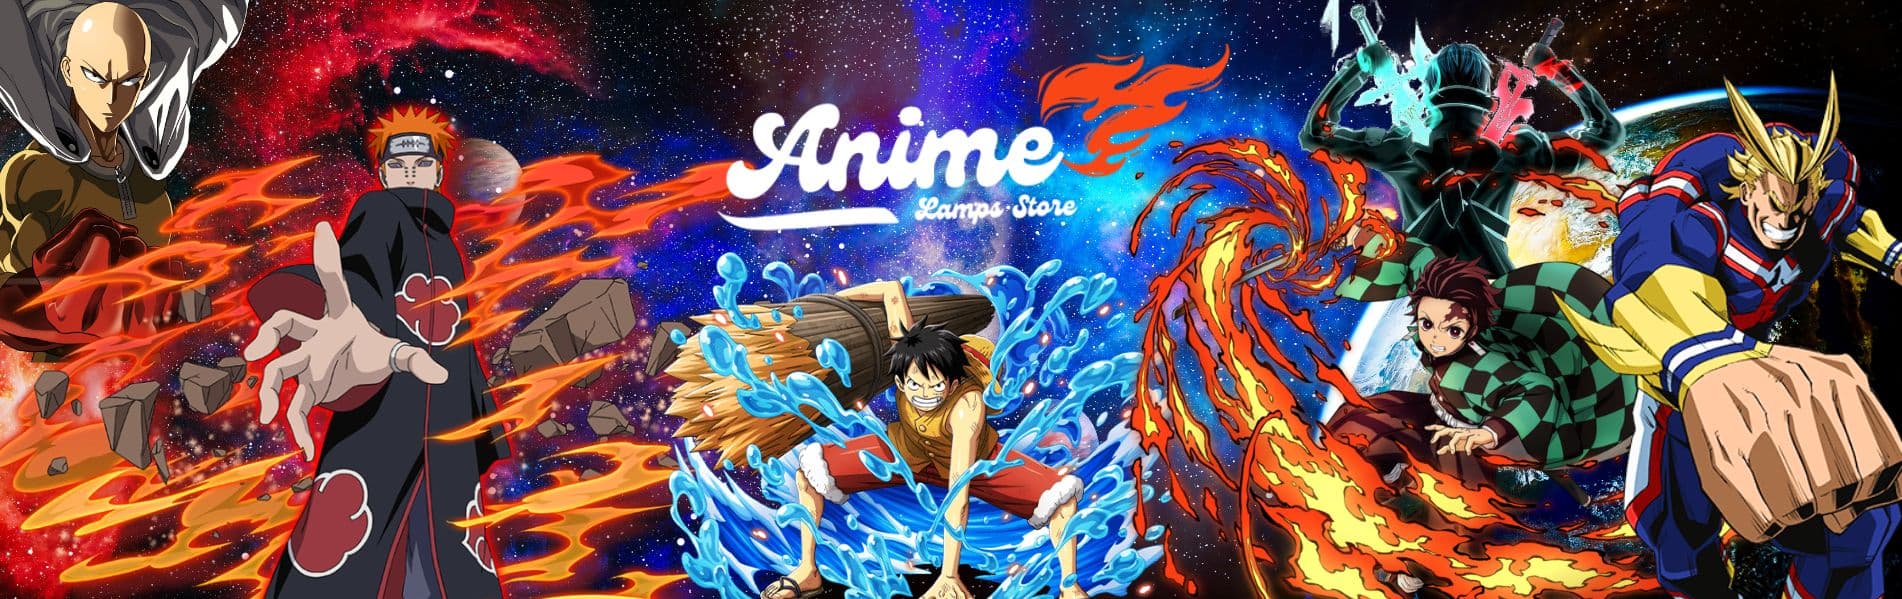 Anime Lamps Store Banner